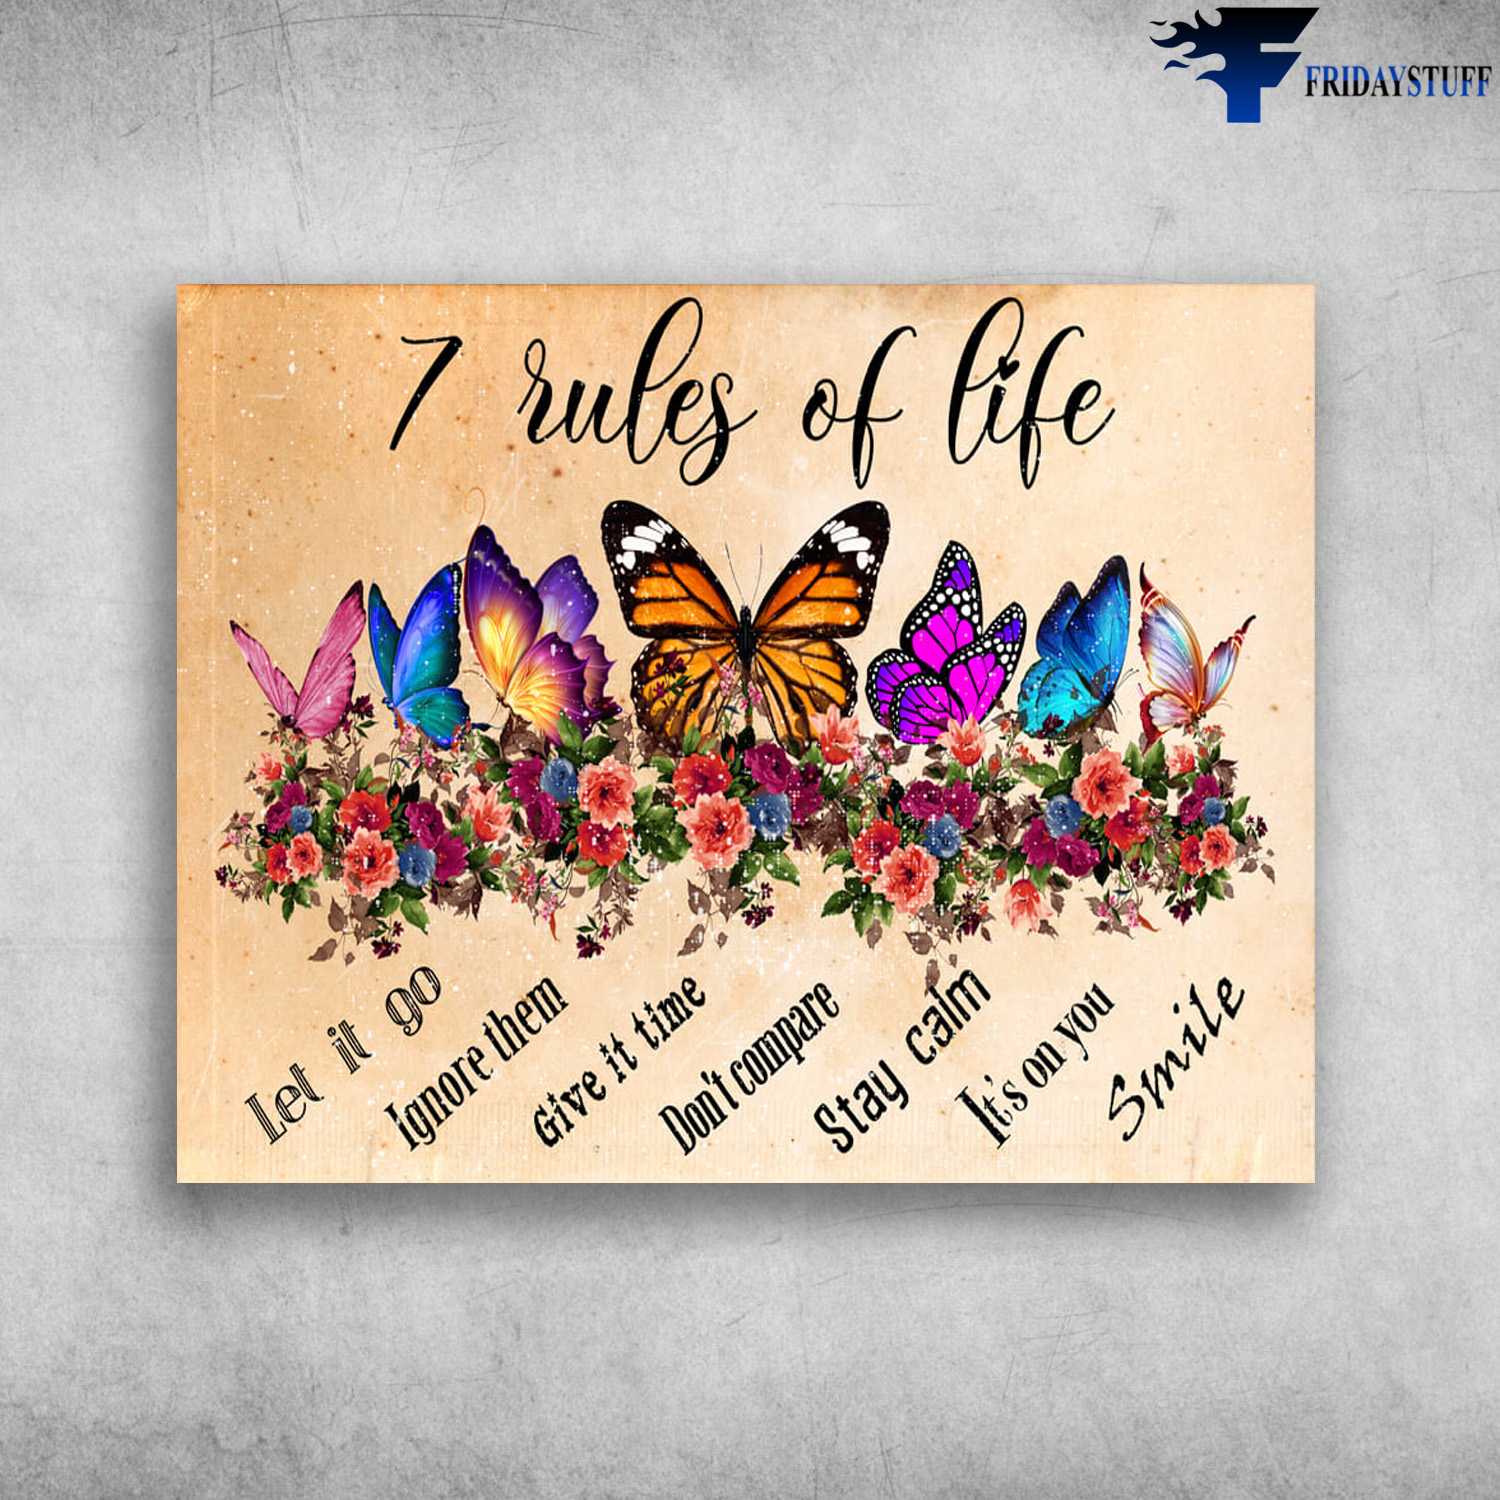 Butterfly Flower, 7 Rules Of Life, Let It Go, Ignore Them, Give It Time, Don't Compare, Stay Calm, It's On You, Smile